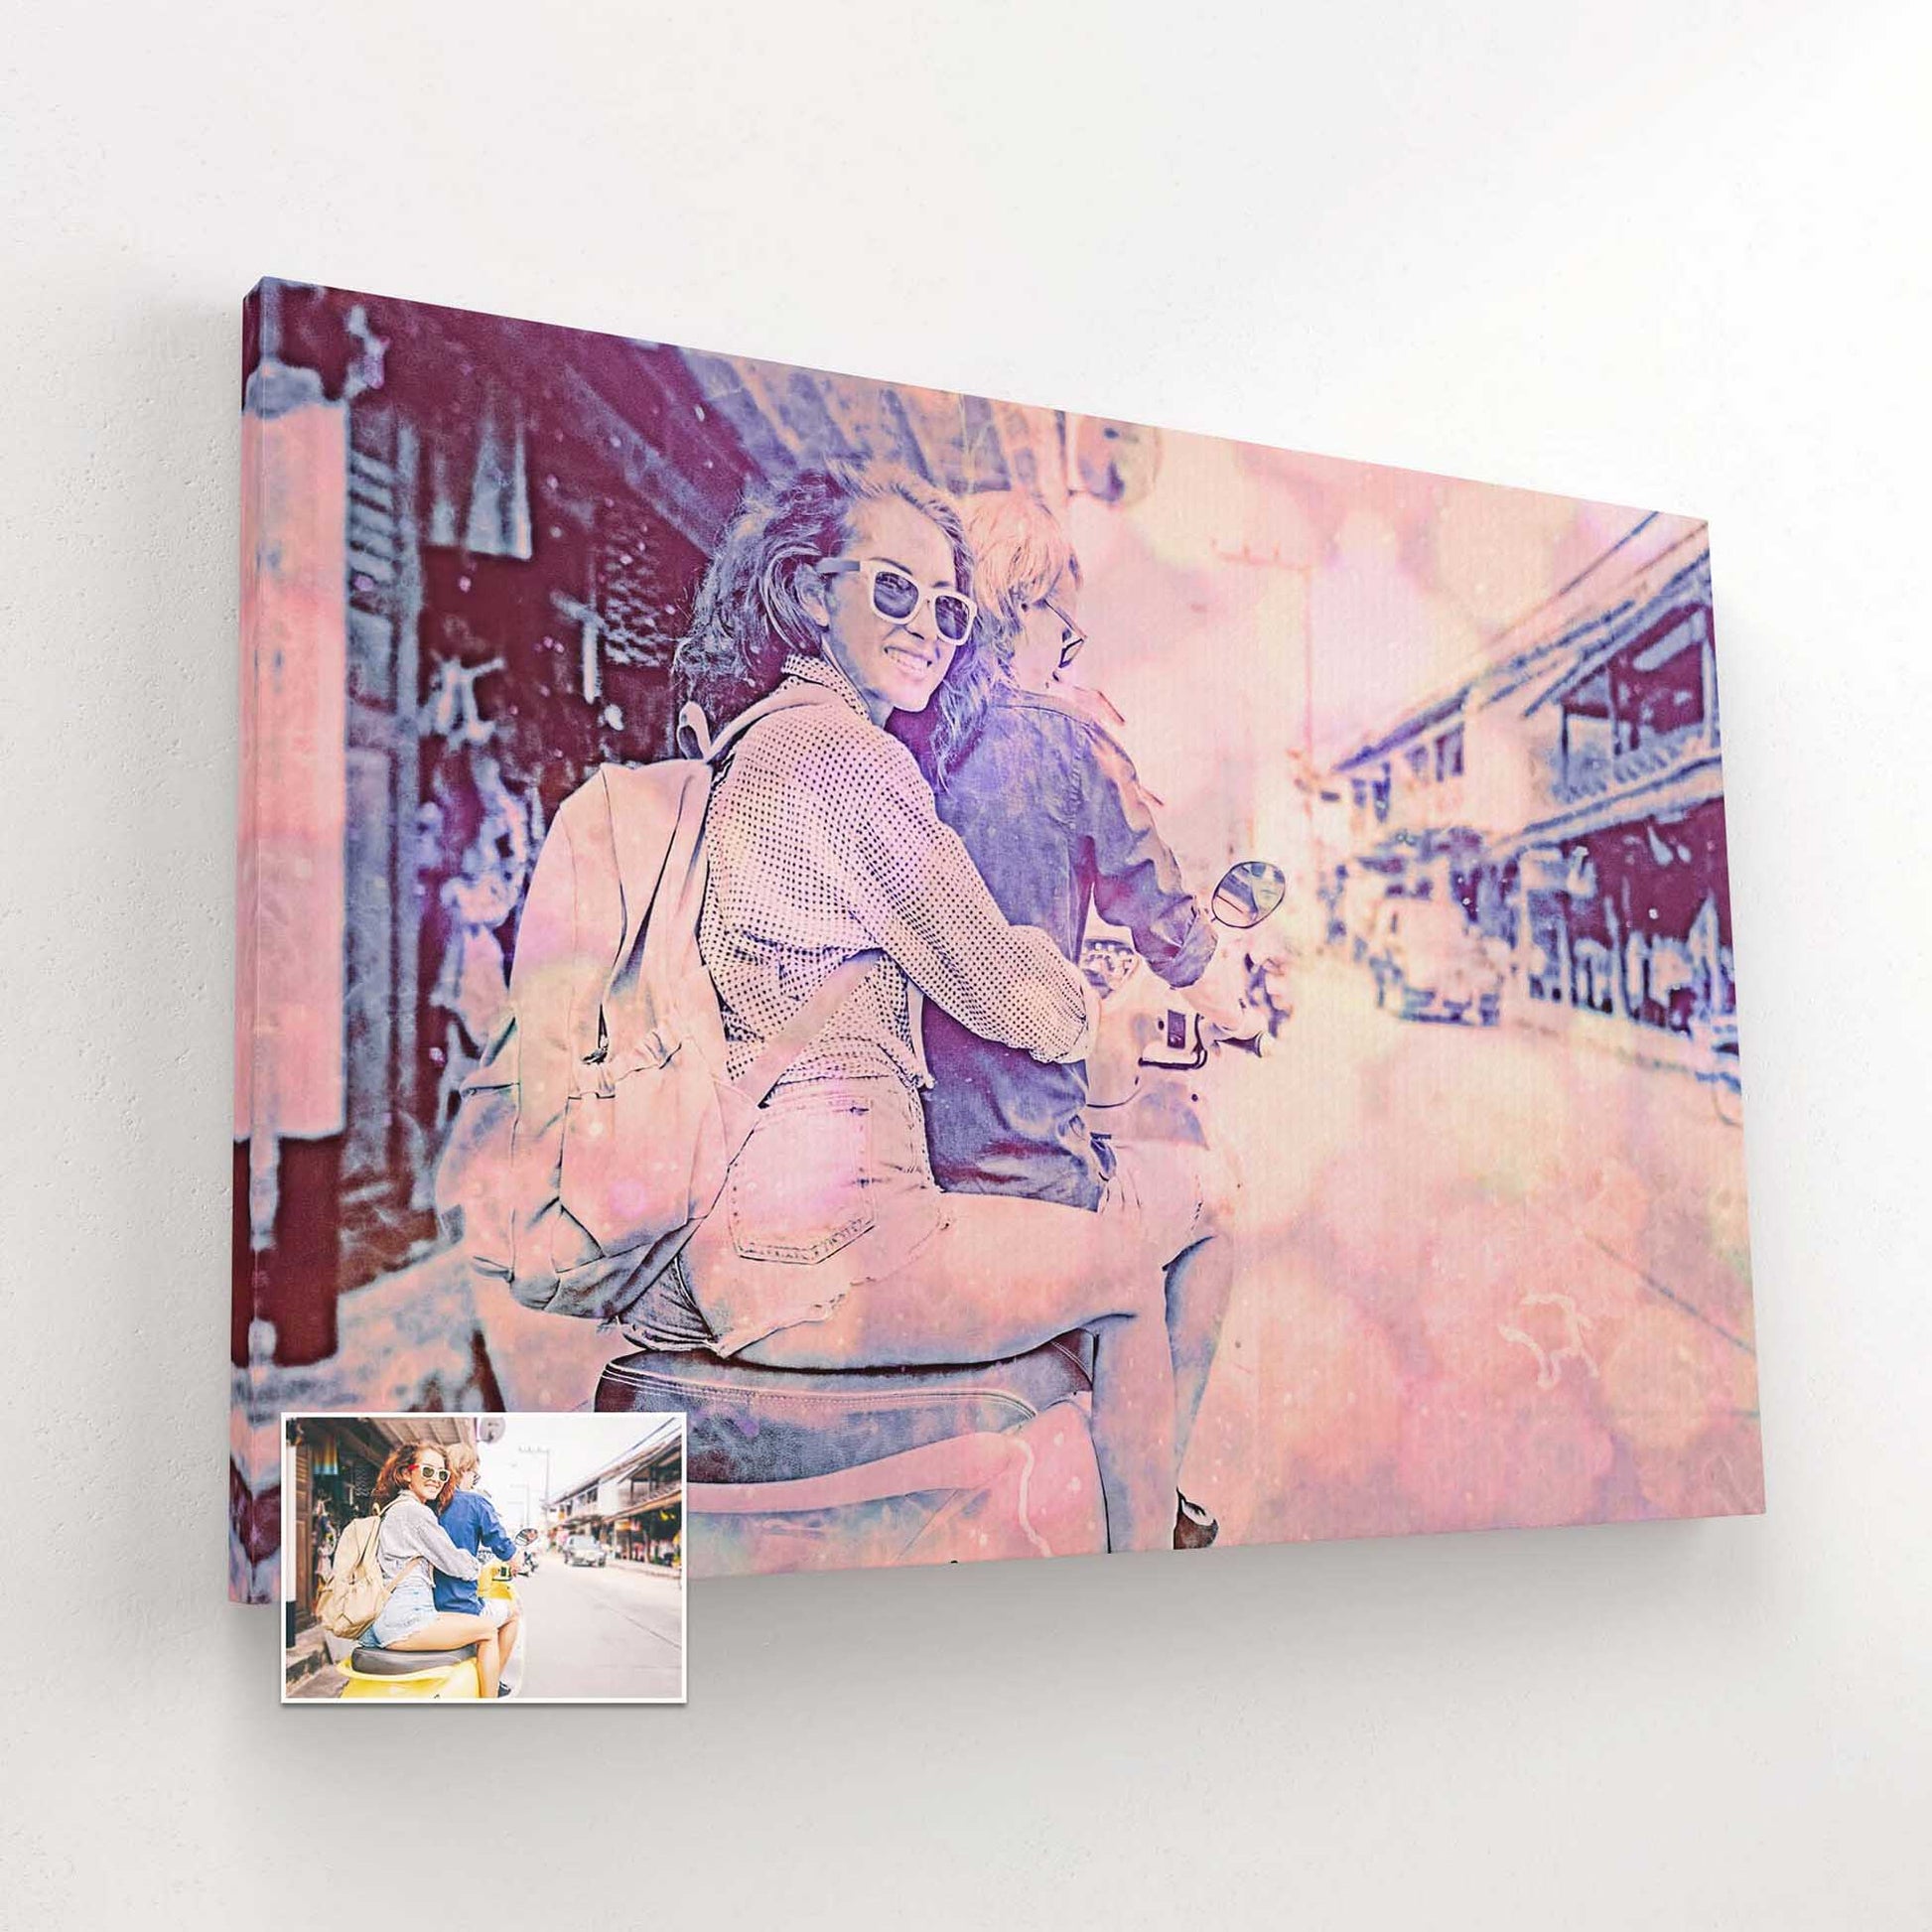 Step into a world of wonder with our Handmade Special Purple FX Canvas. Imbued with vibrant hues and a sense of playfulness, this canvas print brings a touch of magic to any room. It's a joyful masterpiece that invites you 